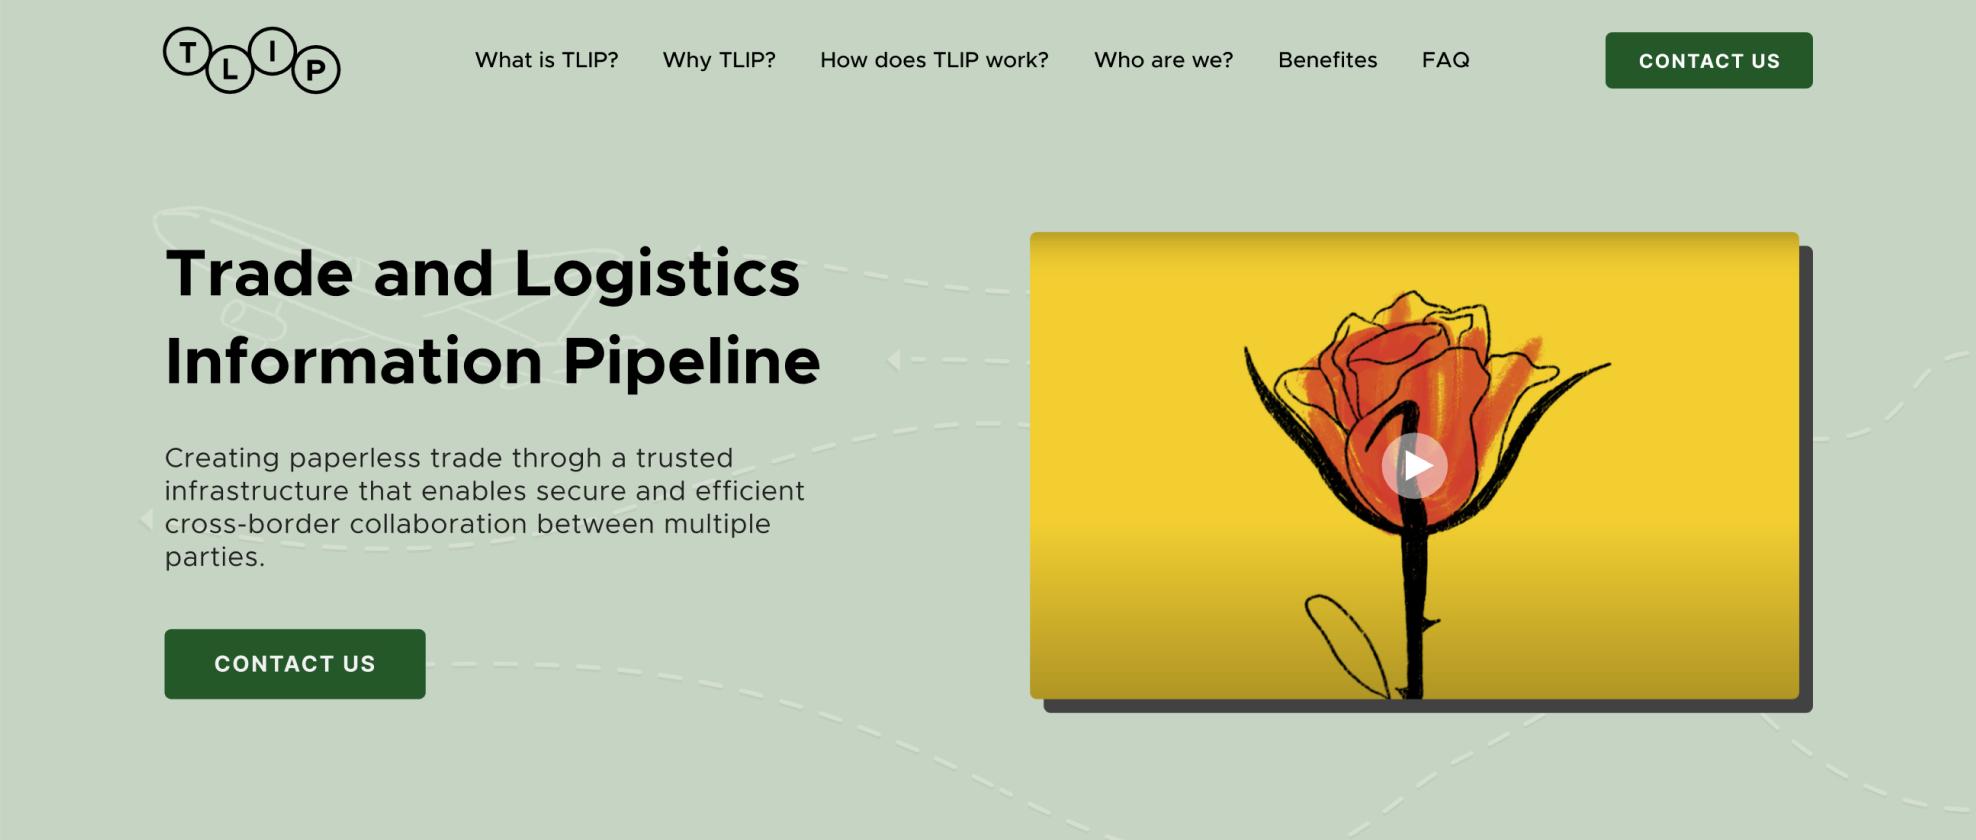 The Trade Logistics Information Pipeline